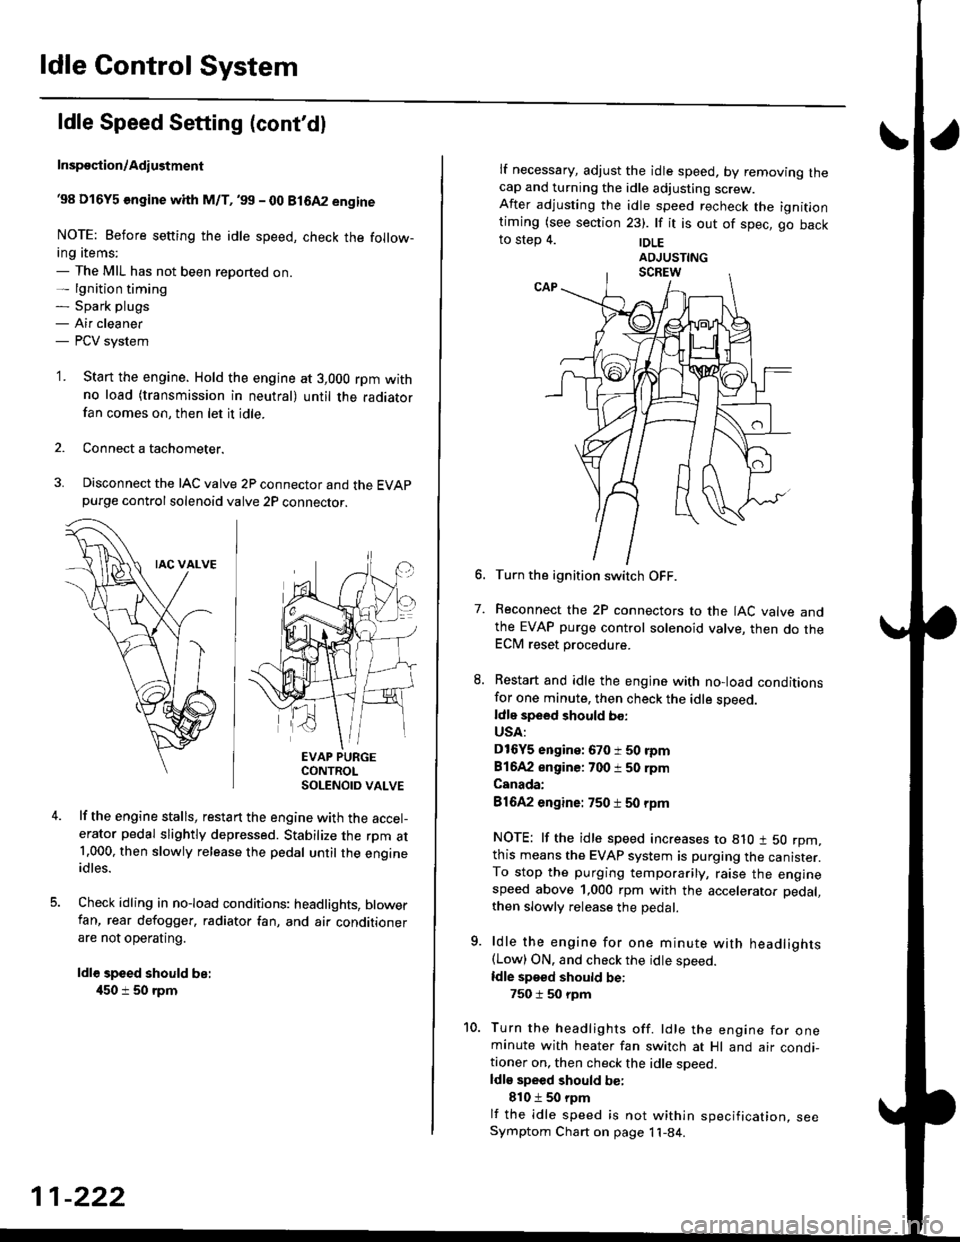 HONDA CIVIC 1998 6.G Service Manual ldle Control System
ldle Speed Setting (contdl
Inspeqtion/Adiustment
38 D16Y5 engine whh M/T,99 - 00 81642 engine
NOTE: Before setting the idle speed, check the follow-ing items;- The MIL has not be